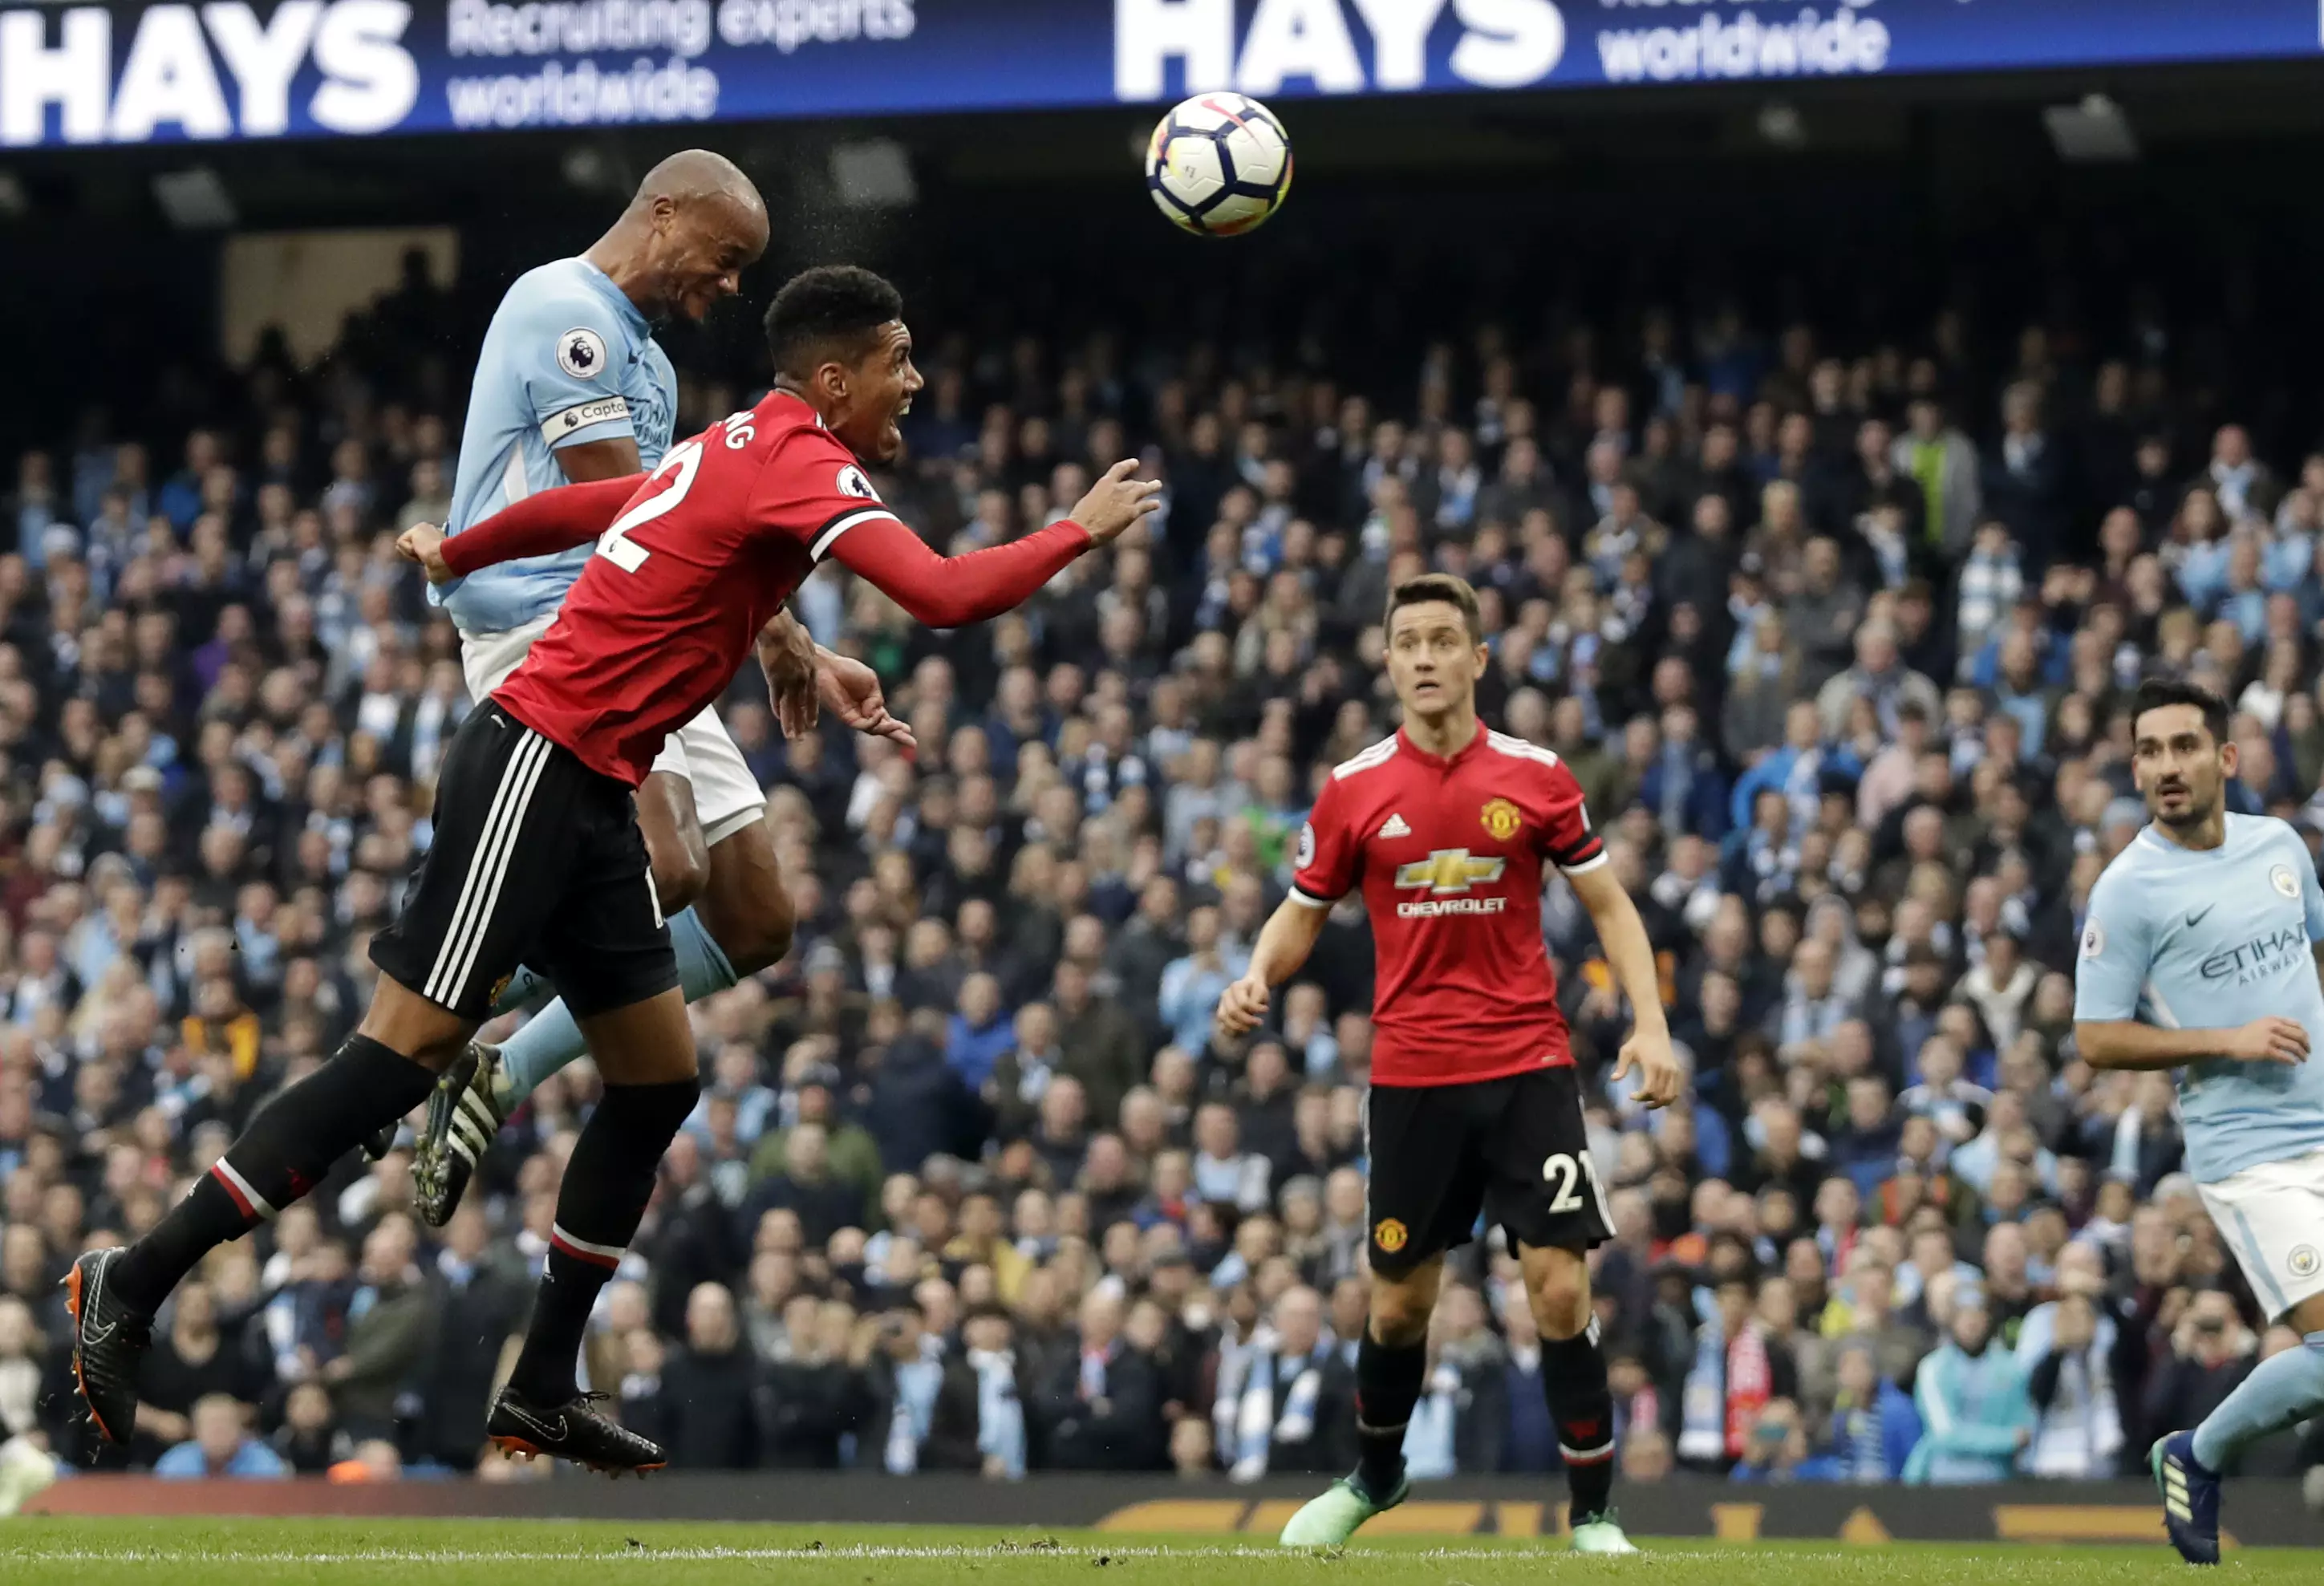 Smalling was left for dead by Kompany last week. Image: PA Images